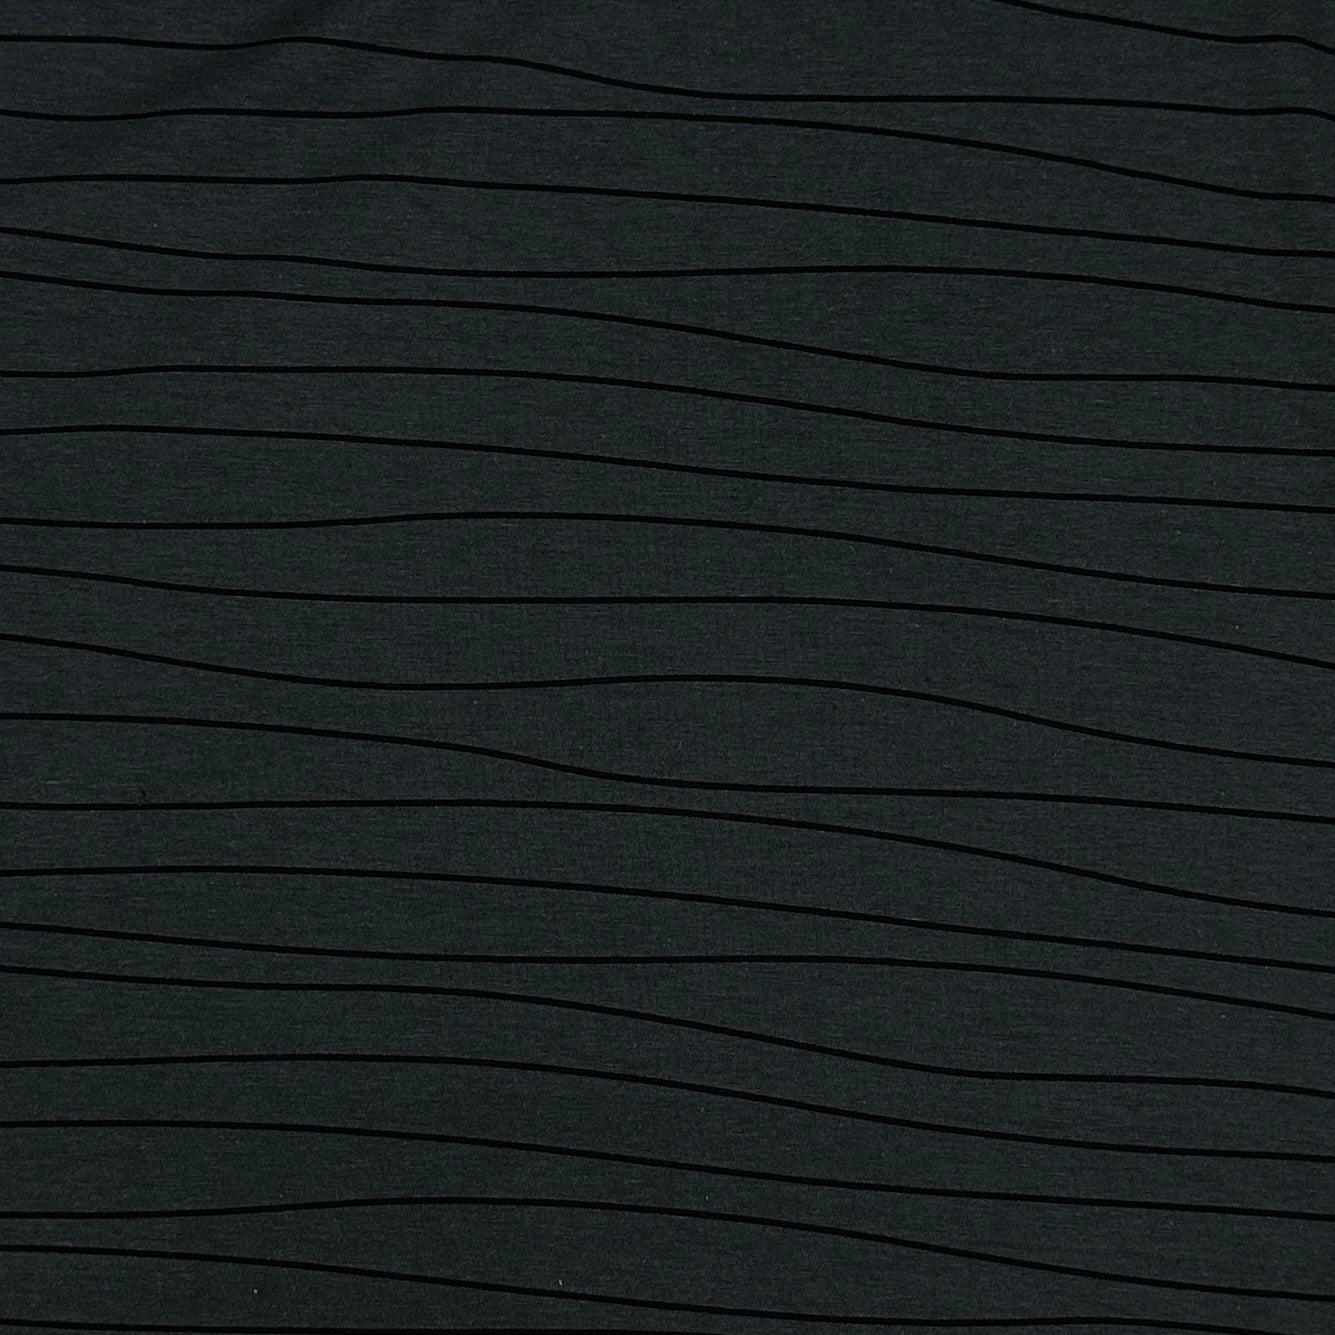 Wavy Black Lines on Green Bamboo/Spandex Jersey Fabric - 265 GSM - Knit in the USA - Nature's Fabrics